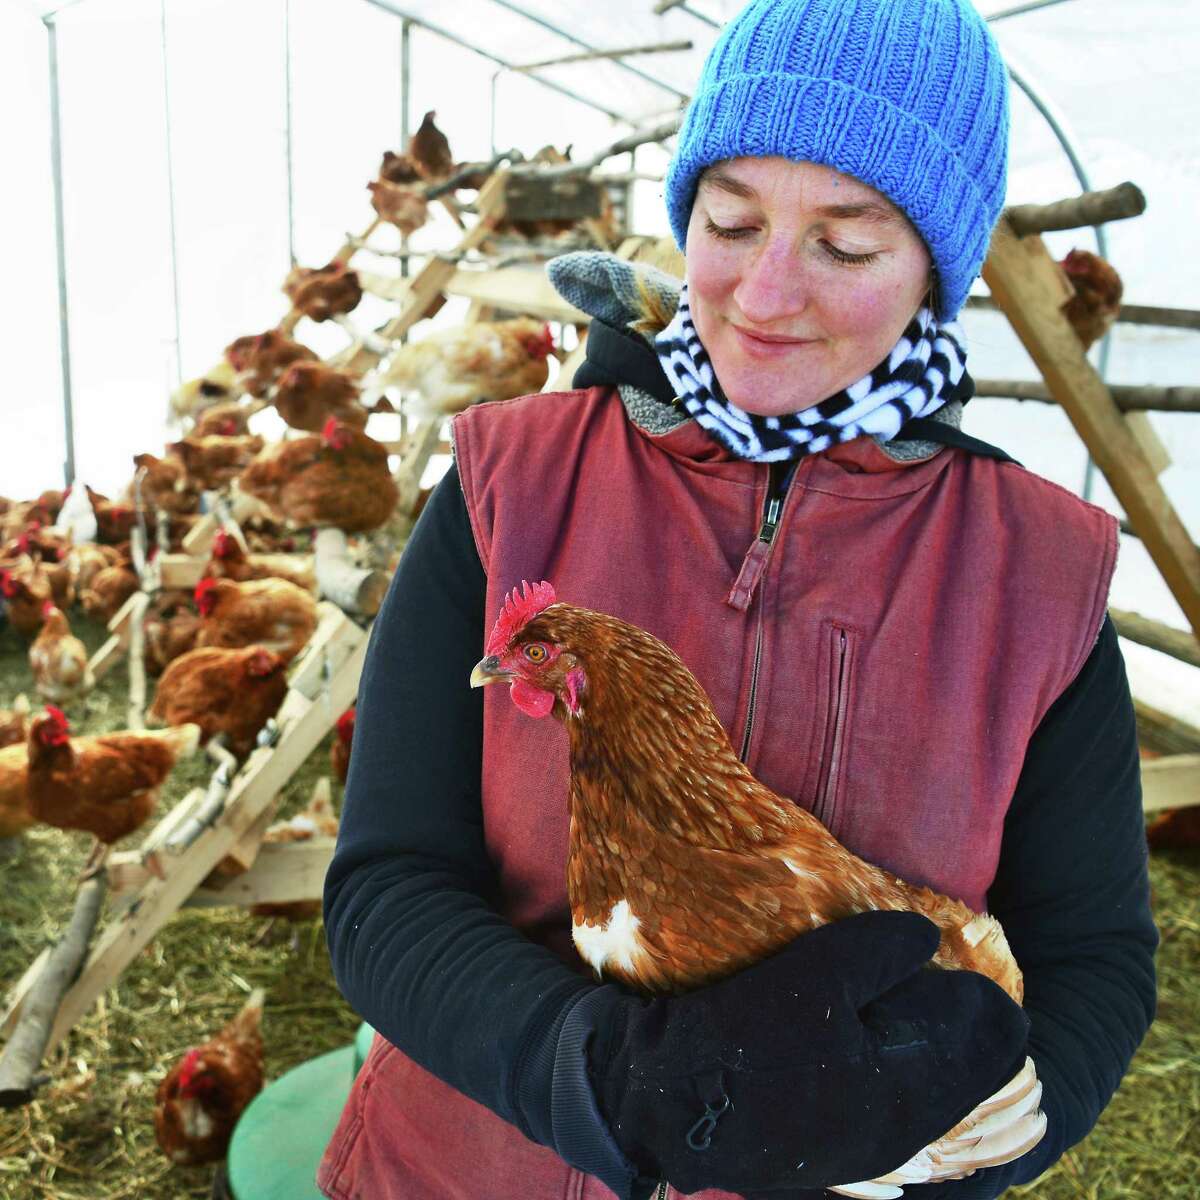 Annie Metzger with one of the chickens on her Laughing Earth Farm Thursday Dec. 14, 2017 in Cropseyville, NY. (John Carl D'Annibale / Times Union)